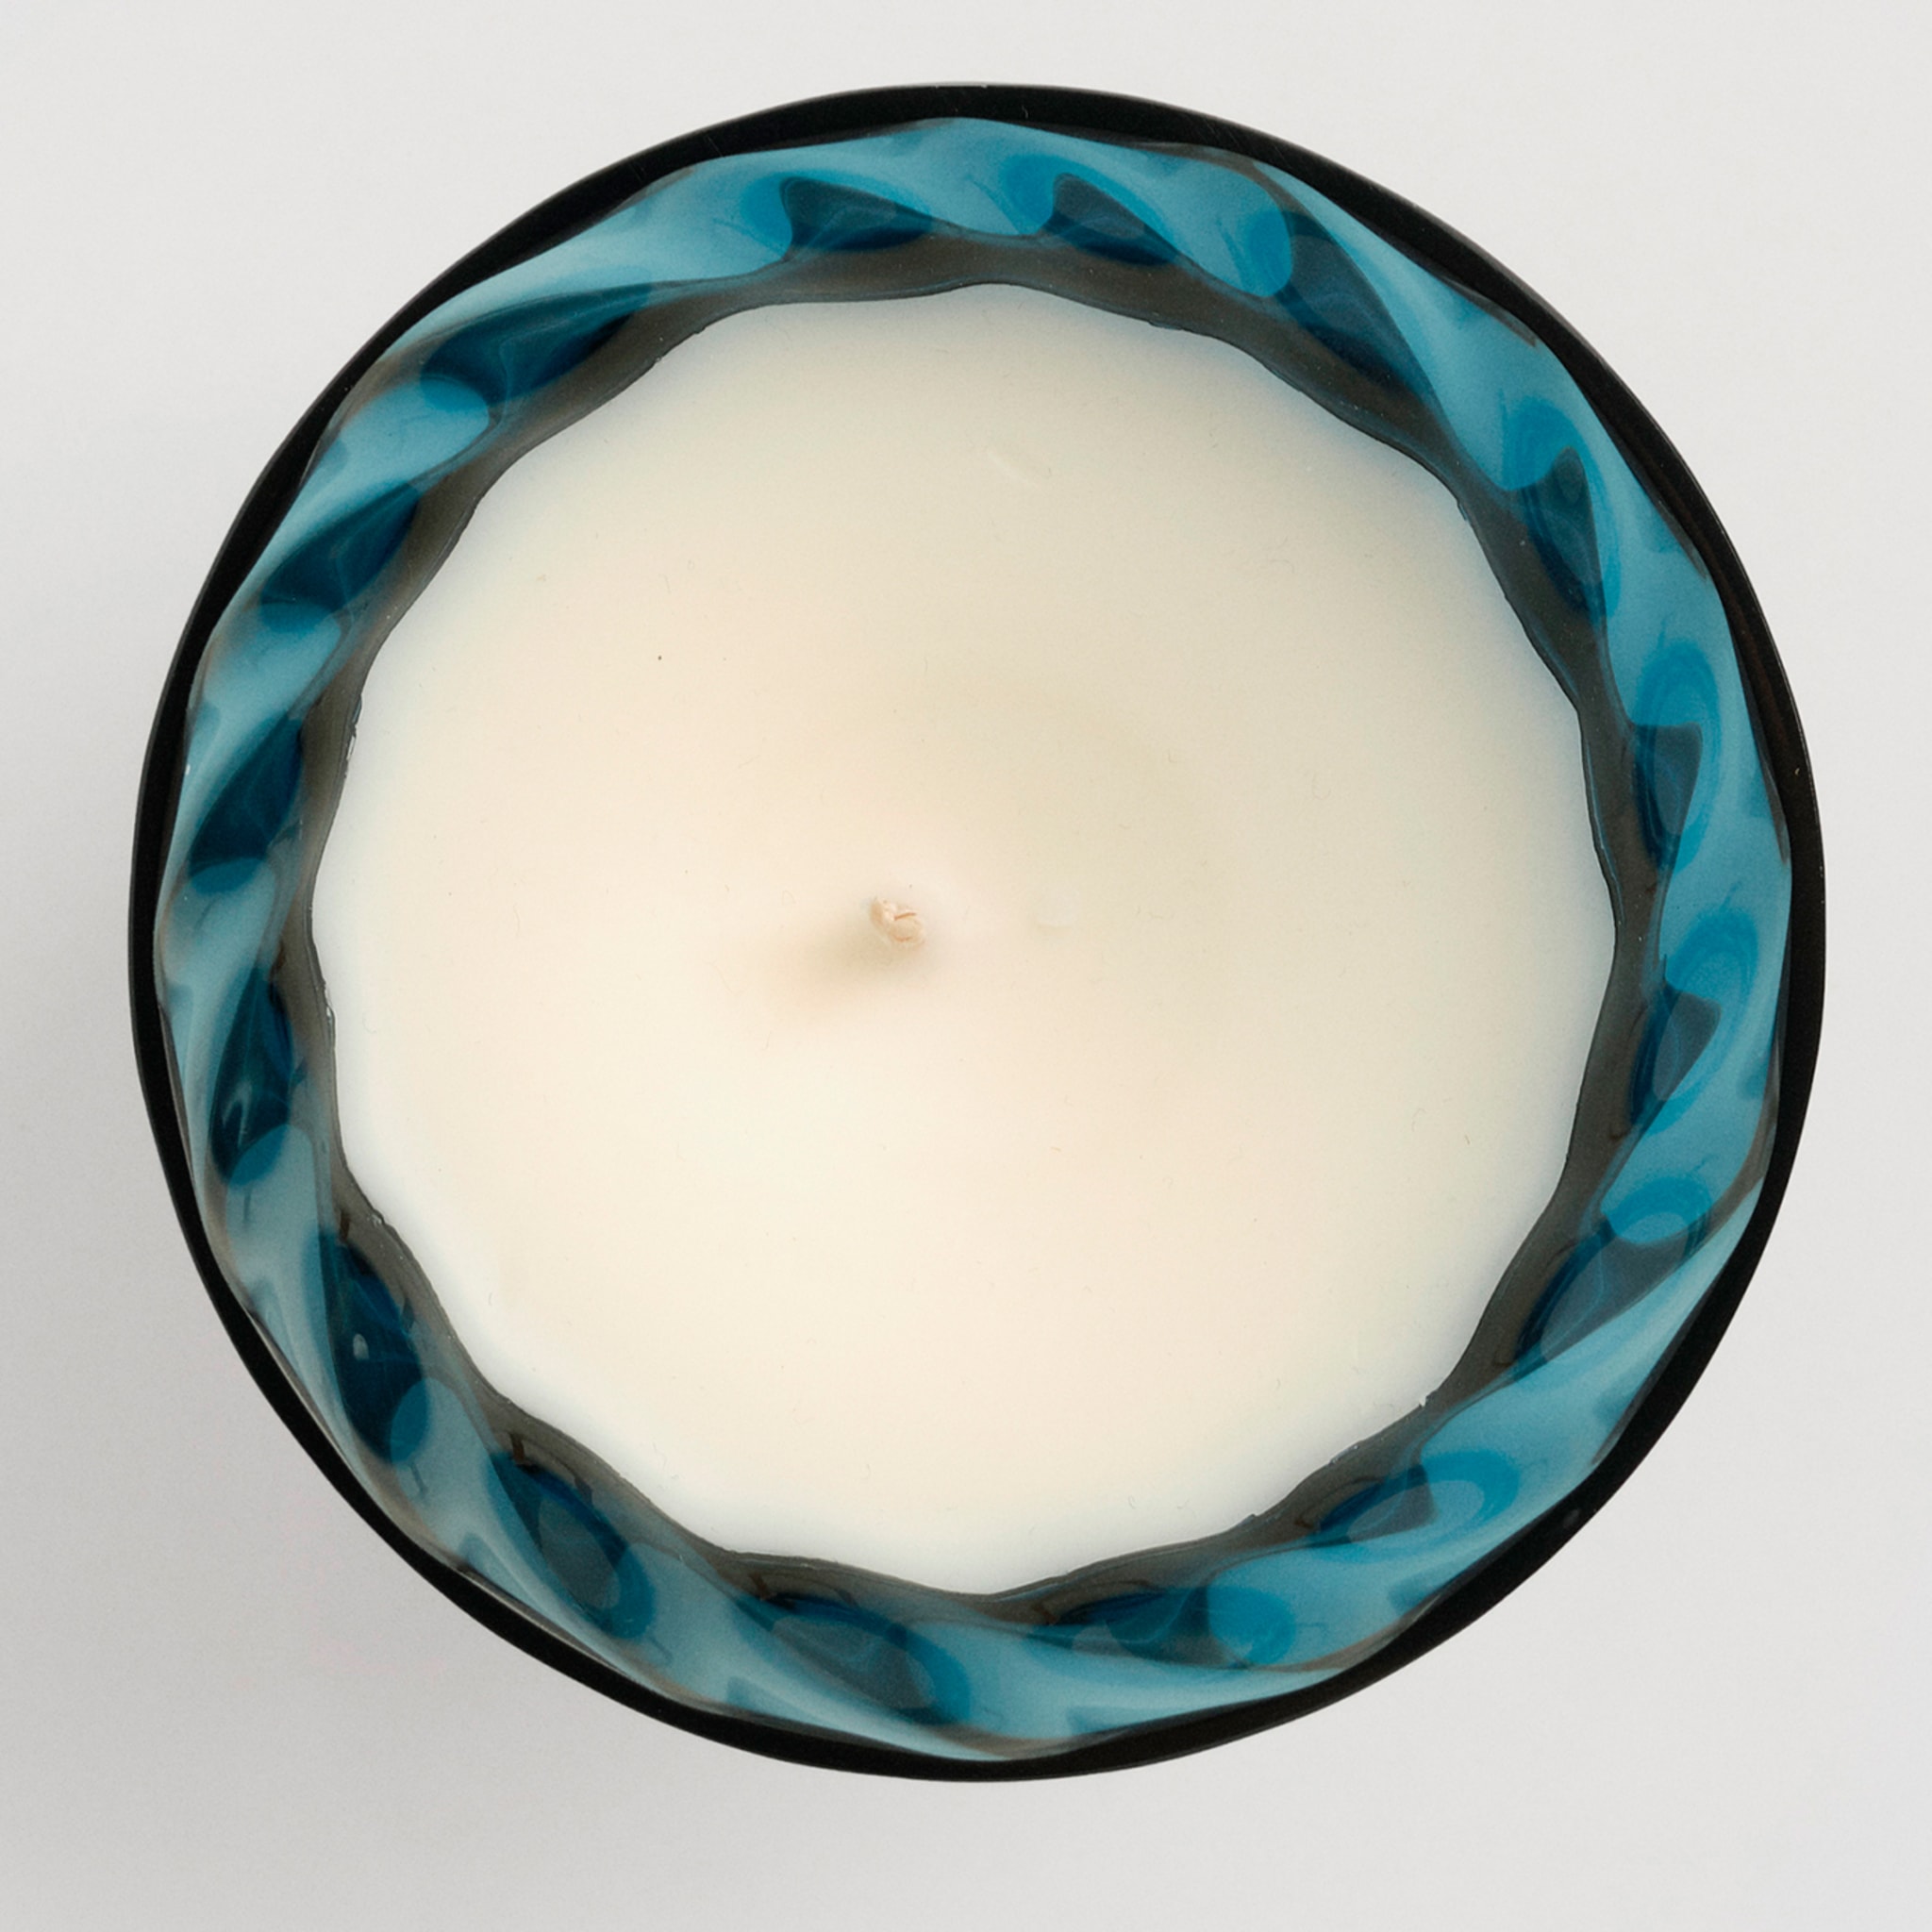 THE FIRST CANDLE - Alternative view 1